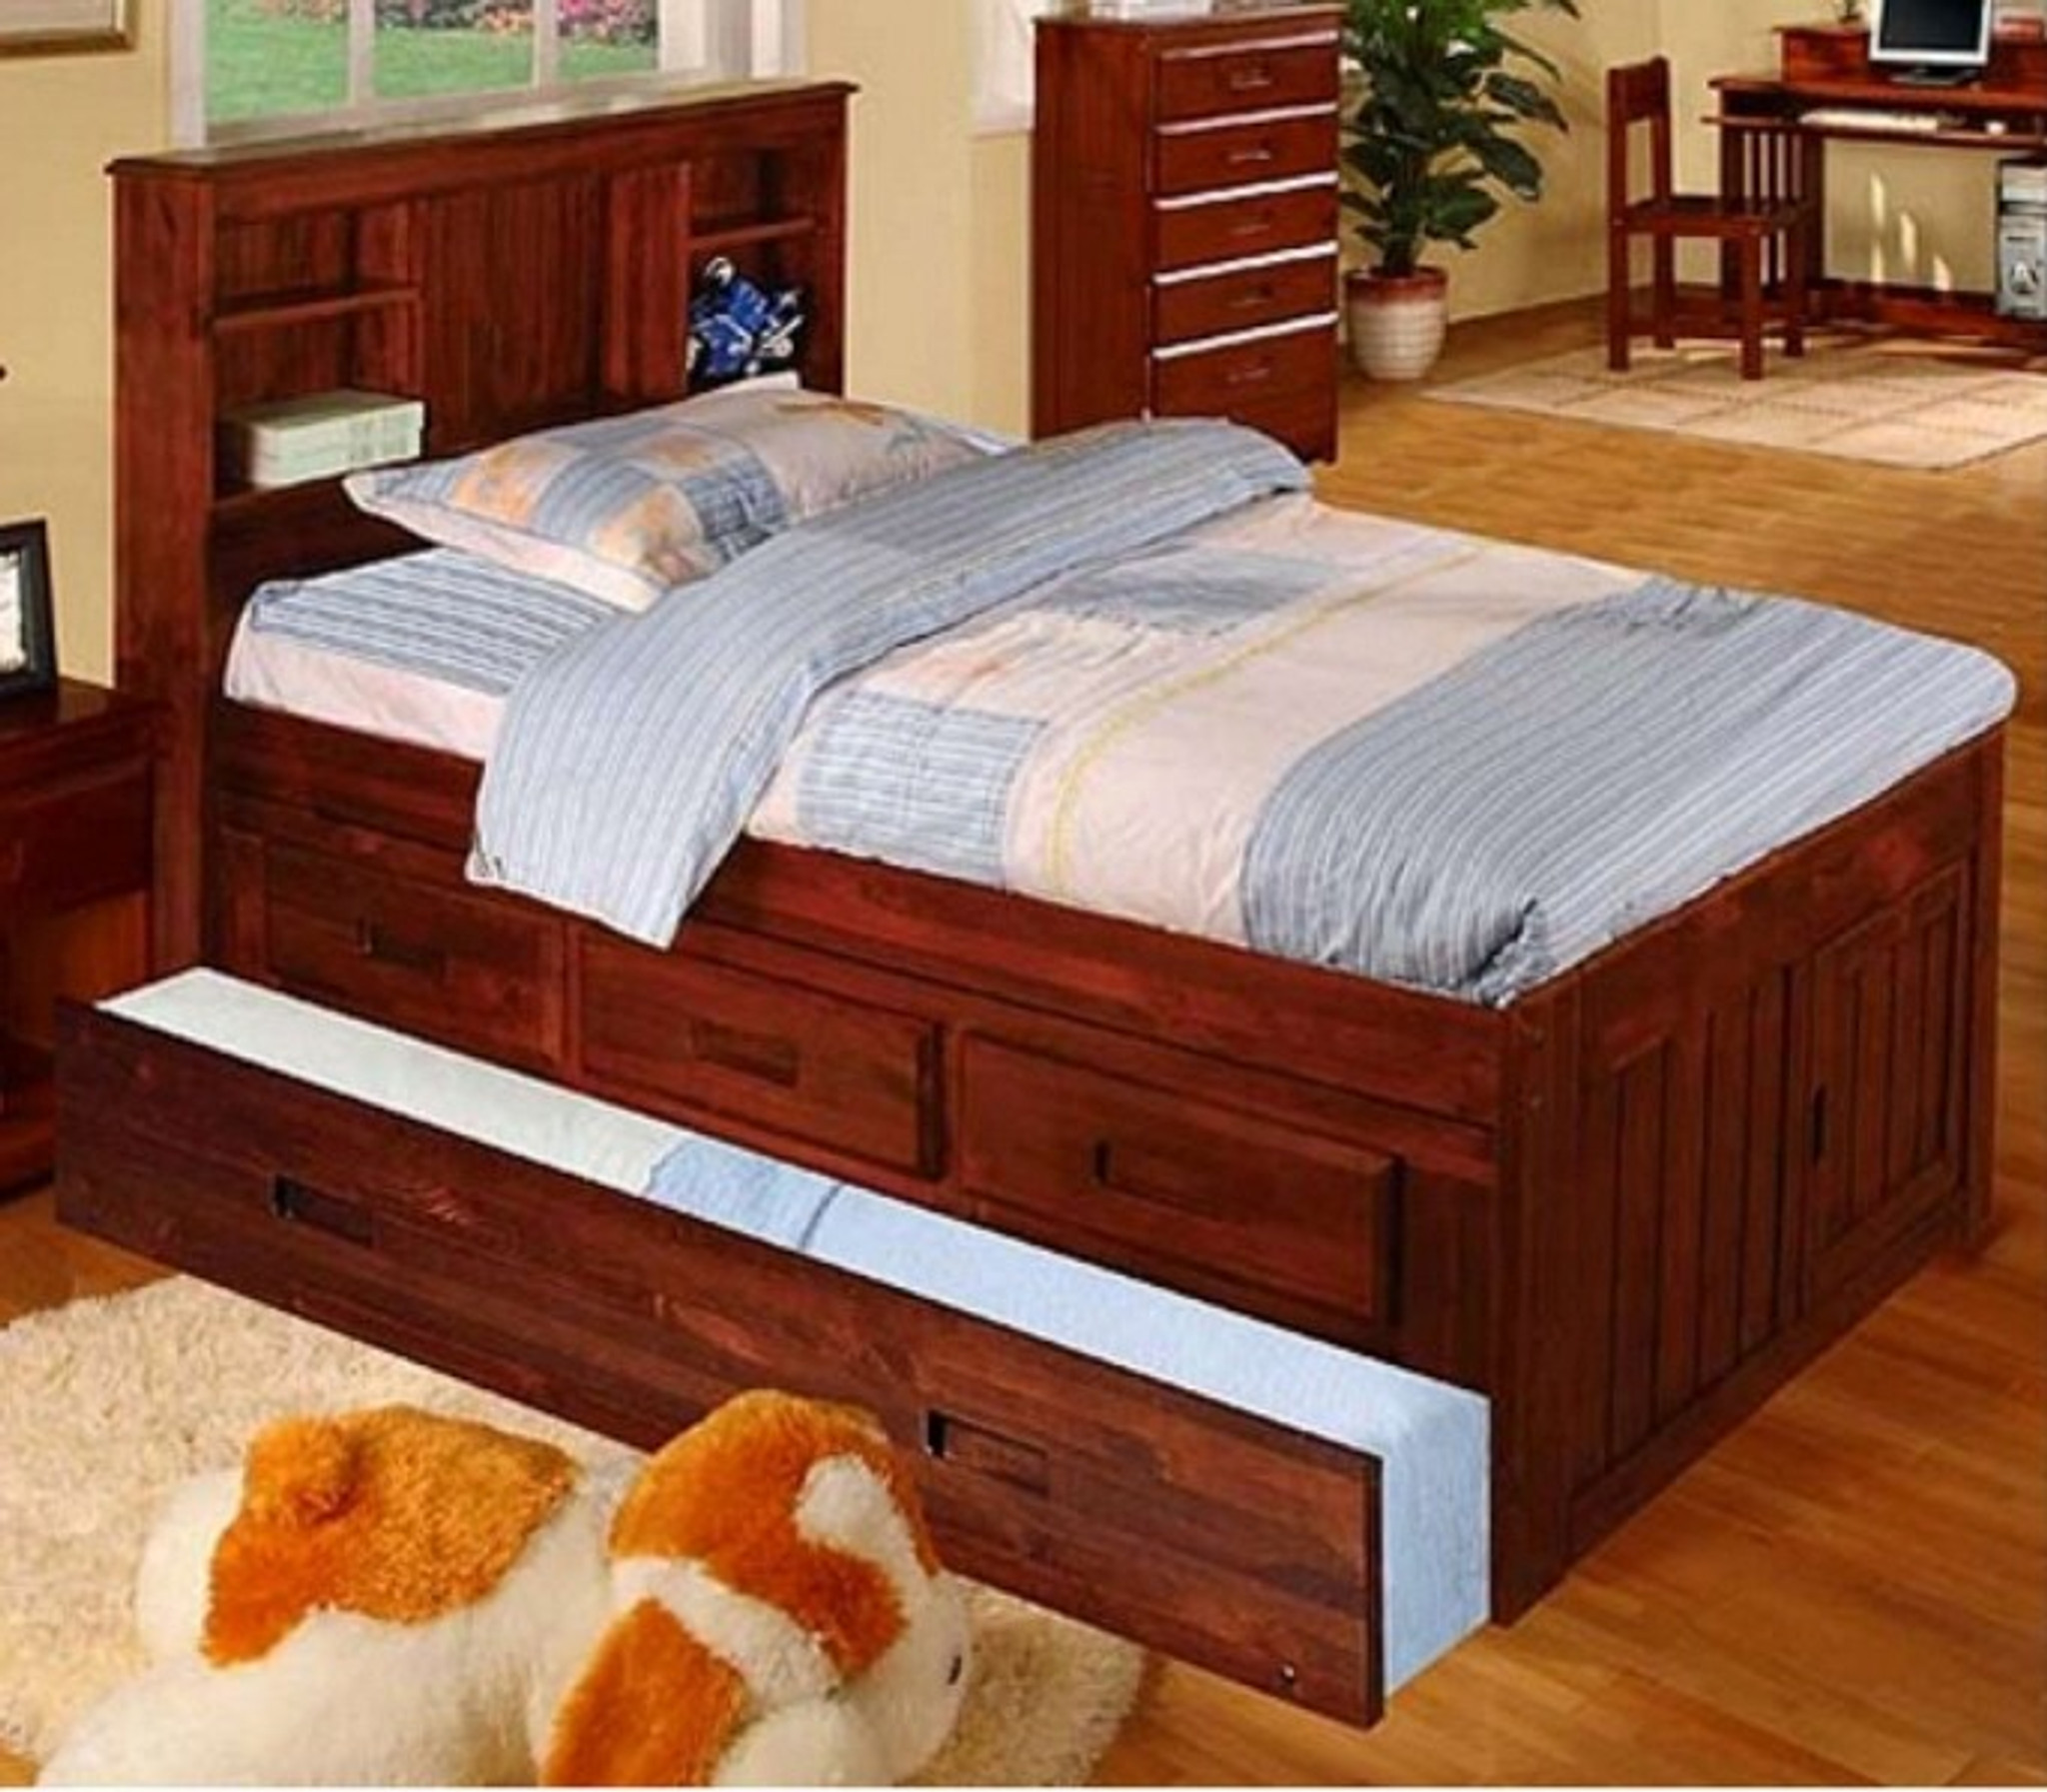 2821 Full Bookcase Headboard Captain Bed Wtrundle 3 Drawers Collection By Happy Homes 